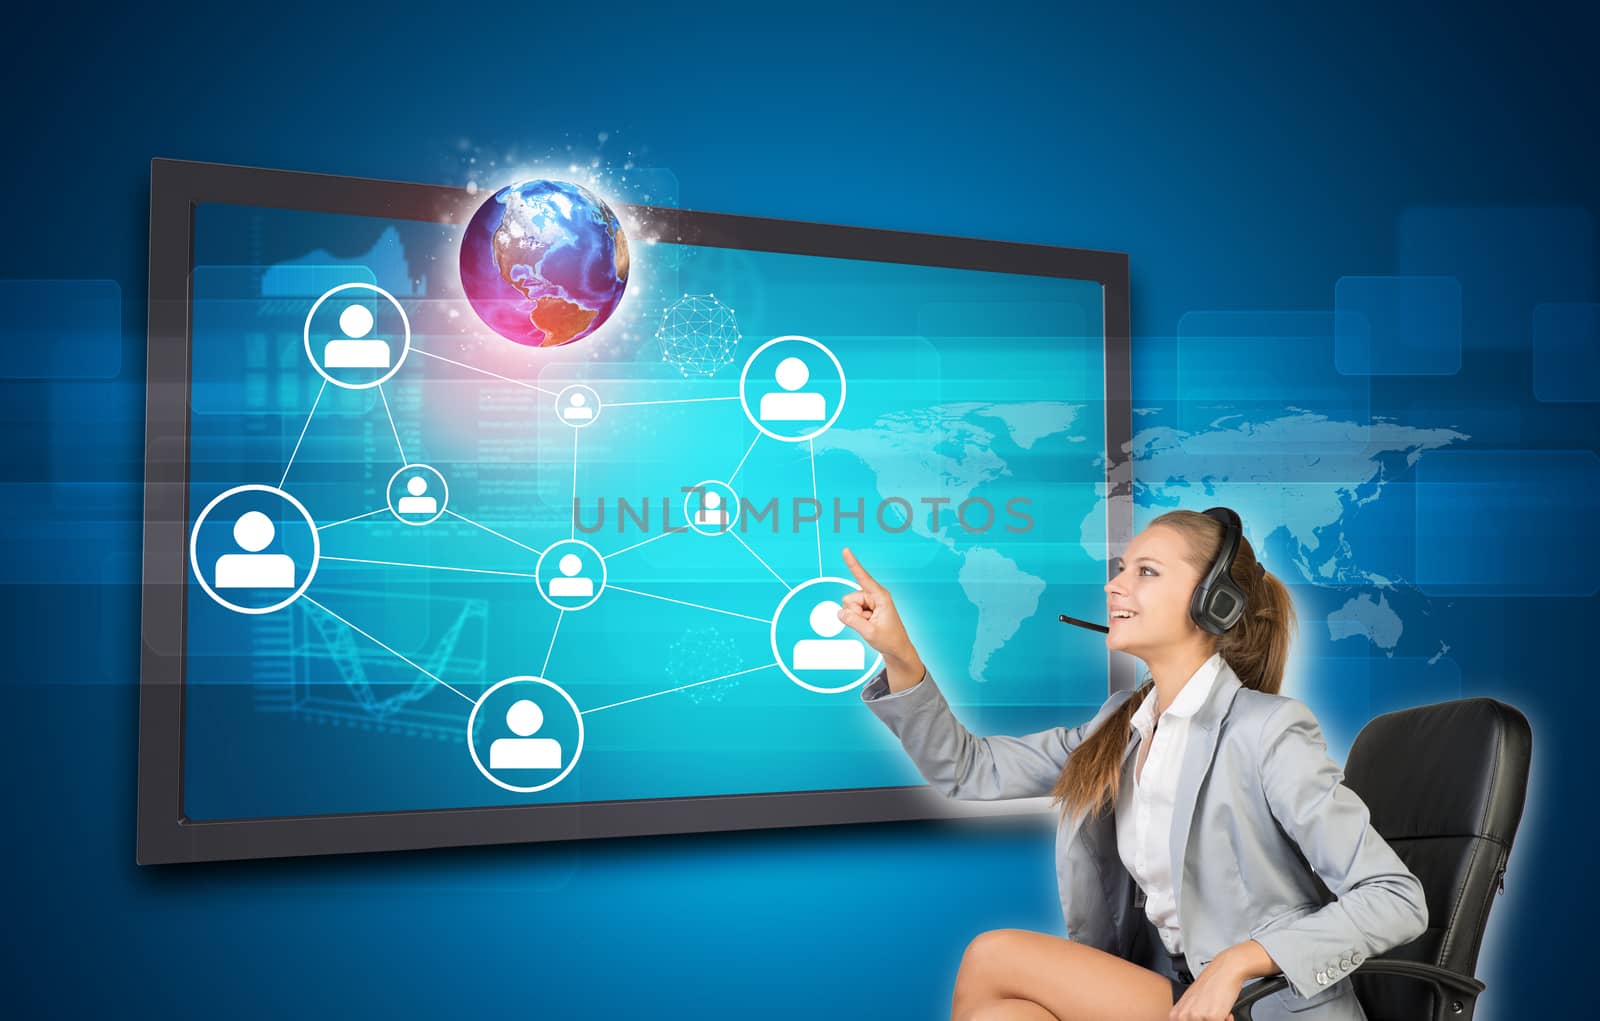 Businesswoman in headset using touch screen interface with Globe, world map, network of person icons and other elements, on blue background. Element of this image furnished by NASA